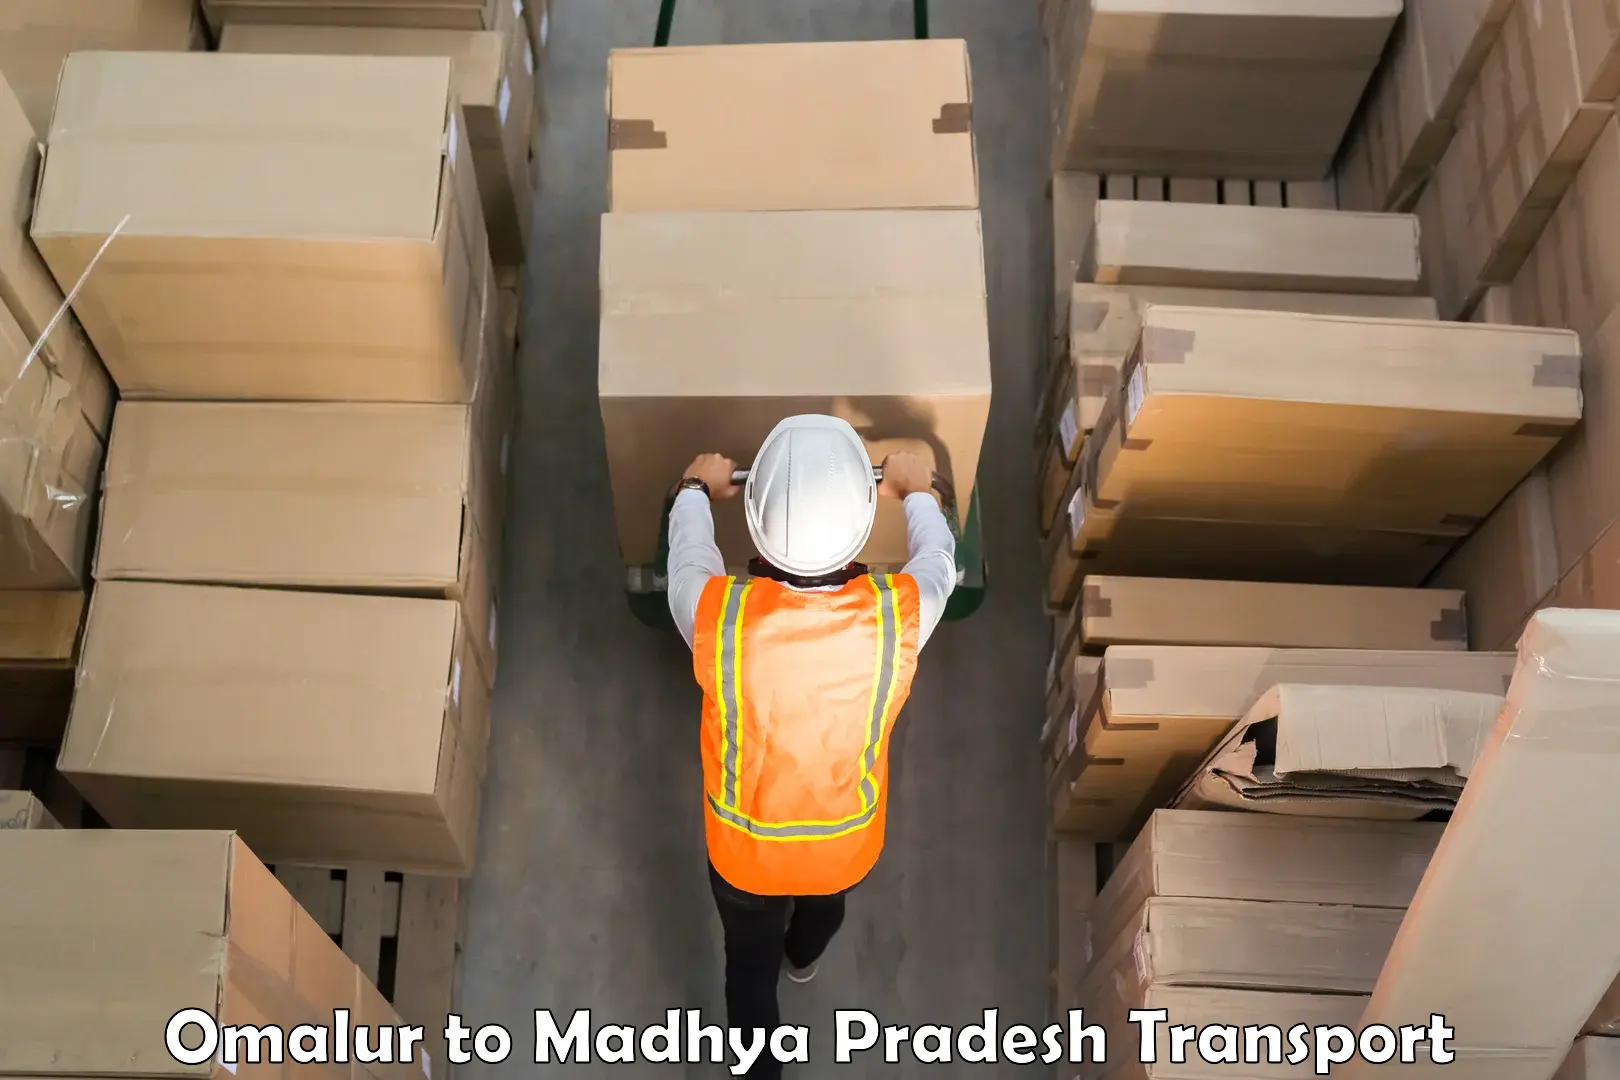 Air freight transport services in Omalur to BHEL Bhopal